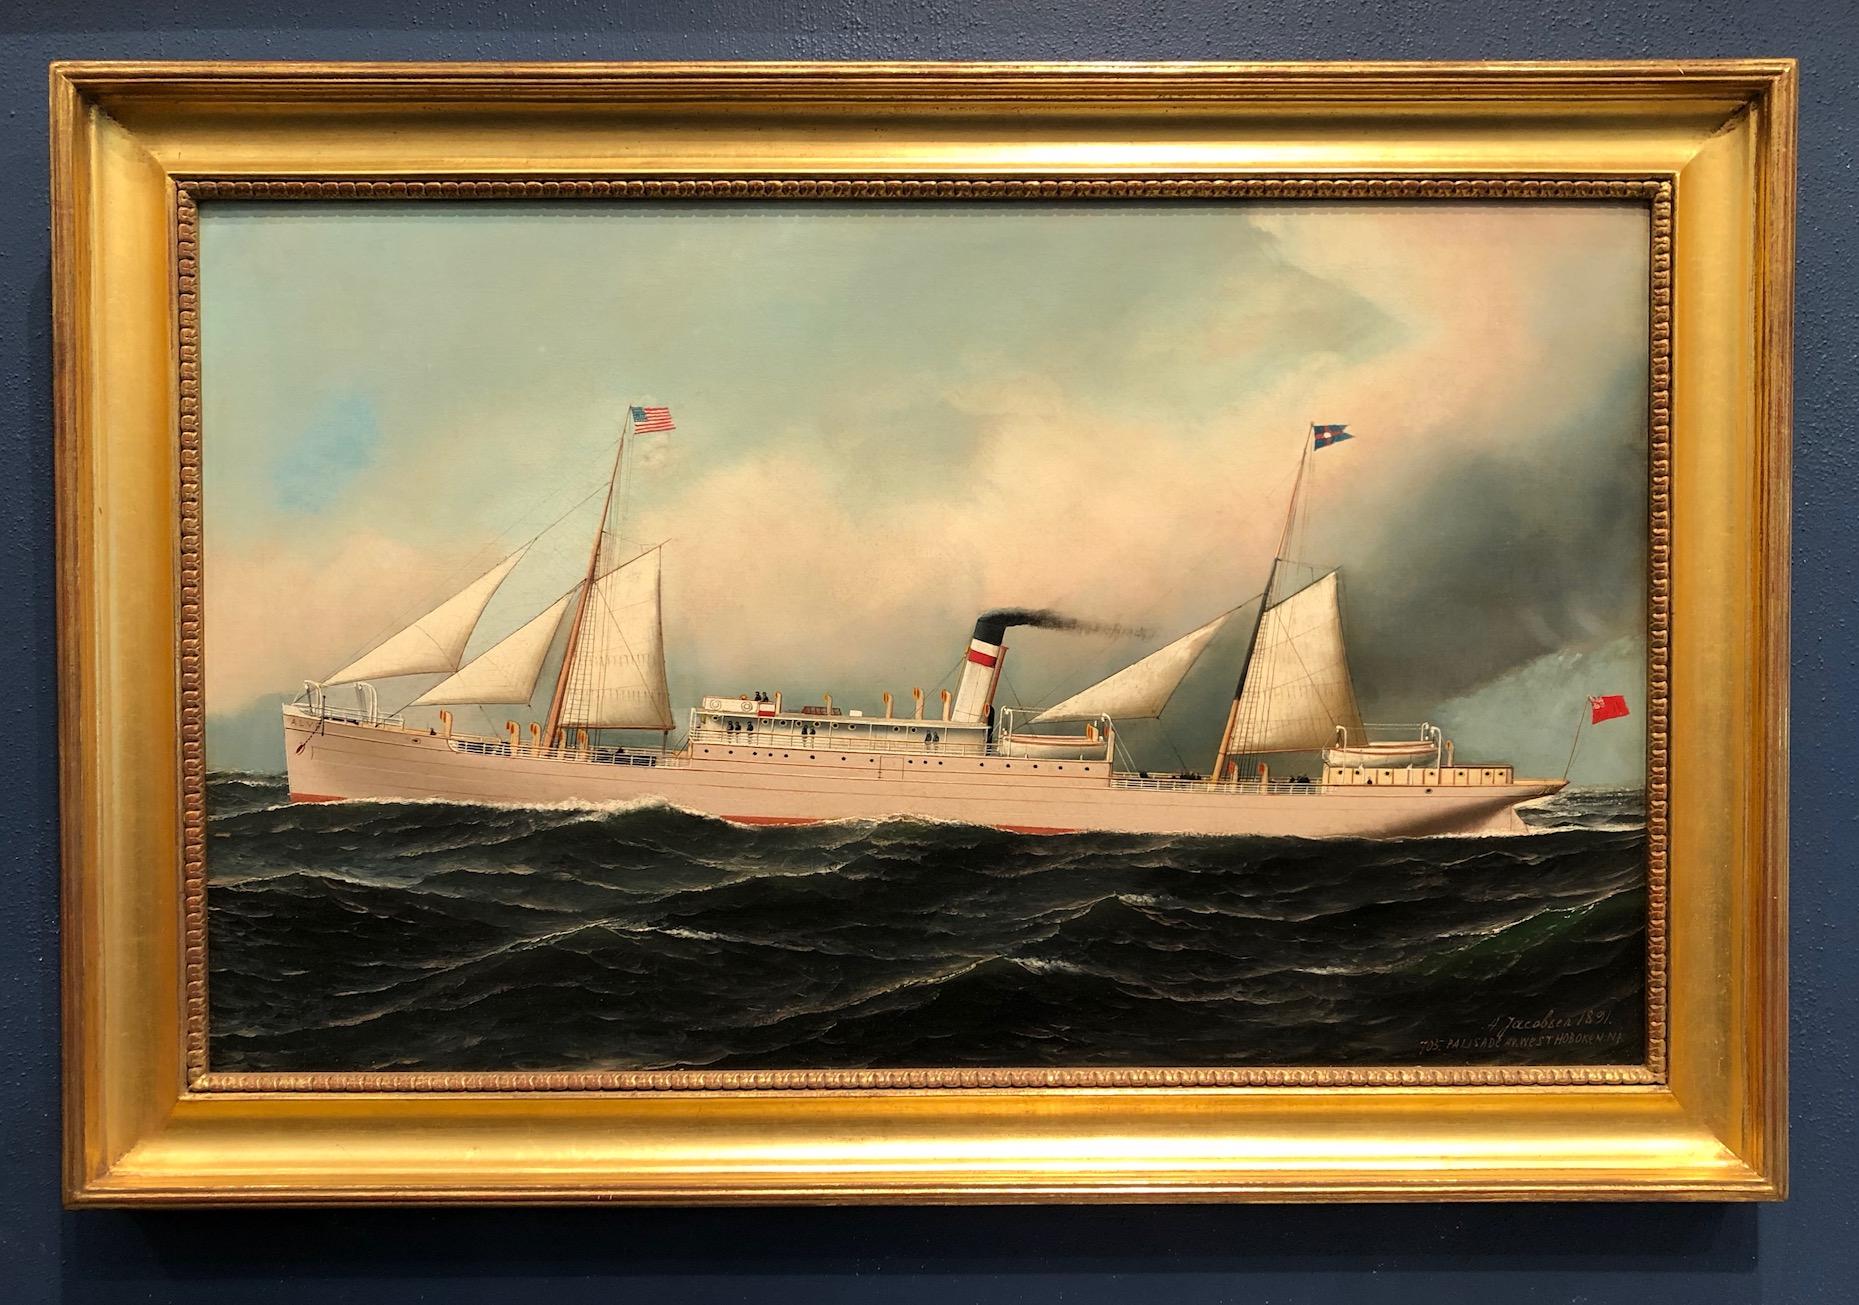 Transitional Steamer Alvo   - Painting by Antonio Jacobsen